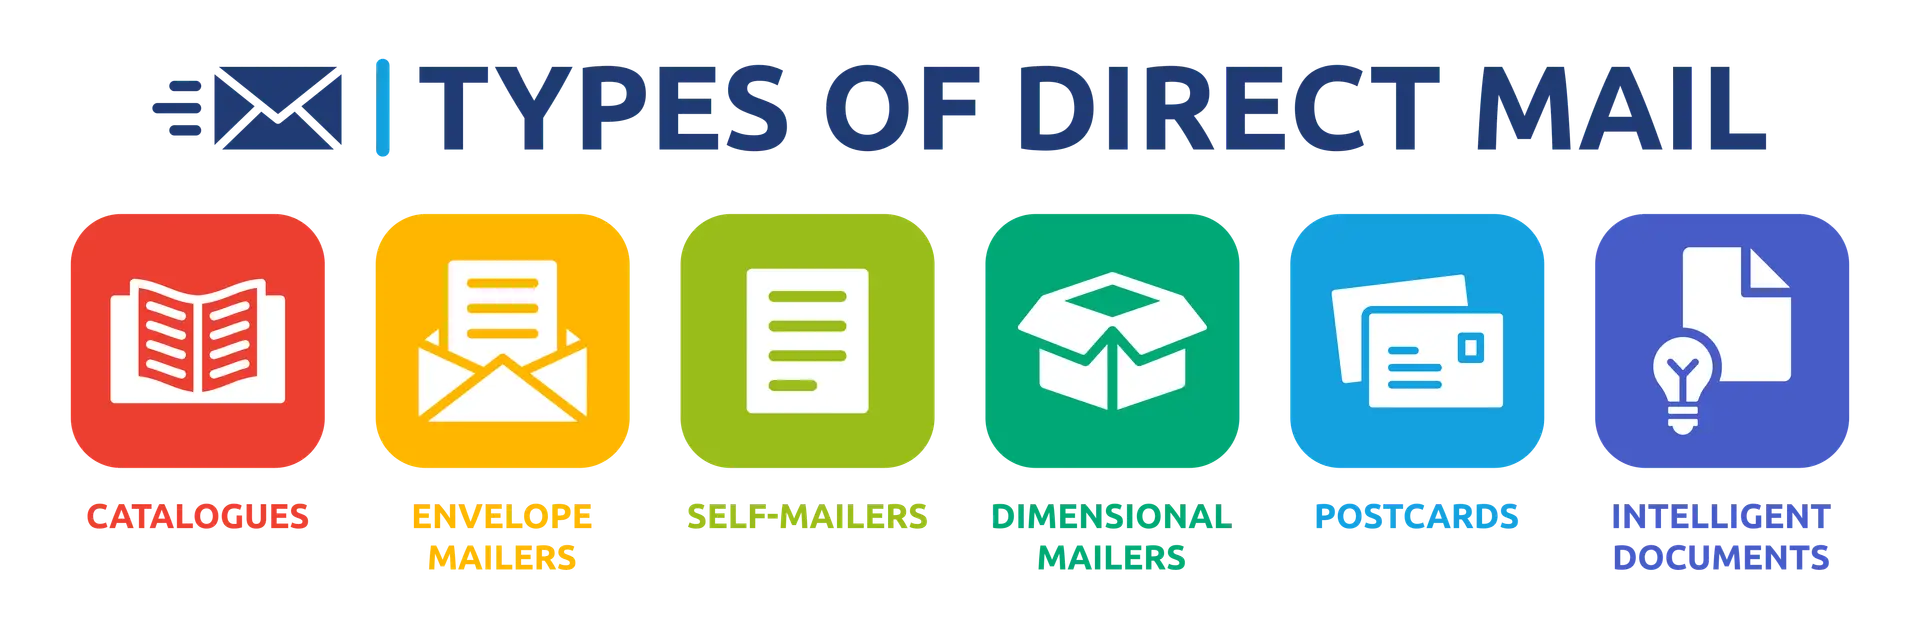 tyes of direct mail - Catalogues, Envelope Mailers, Self Mailers, Dimensional Mailers, Postcards, Intelligent Documents